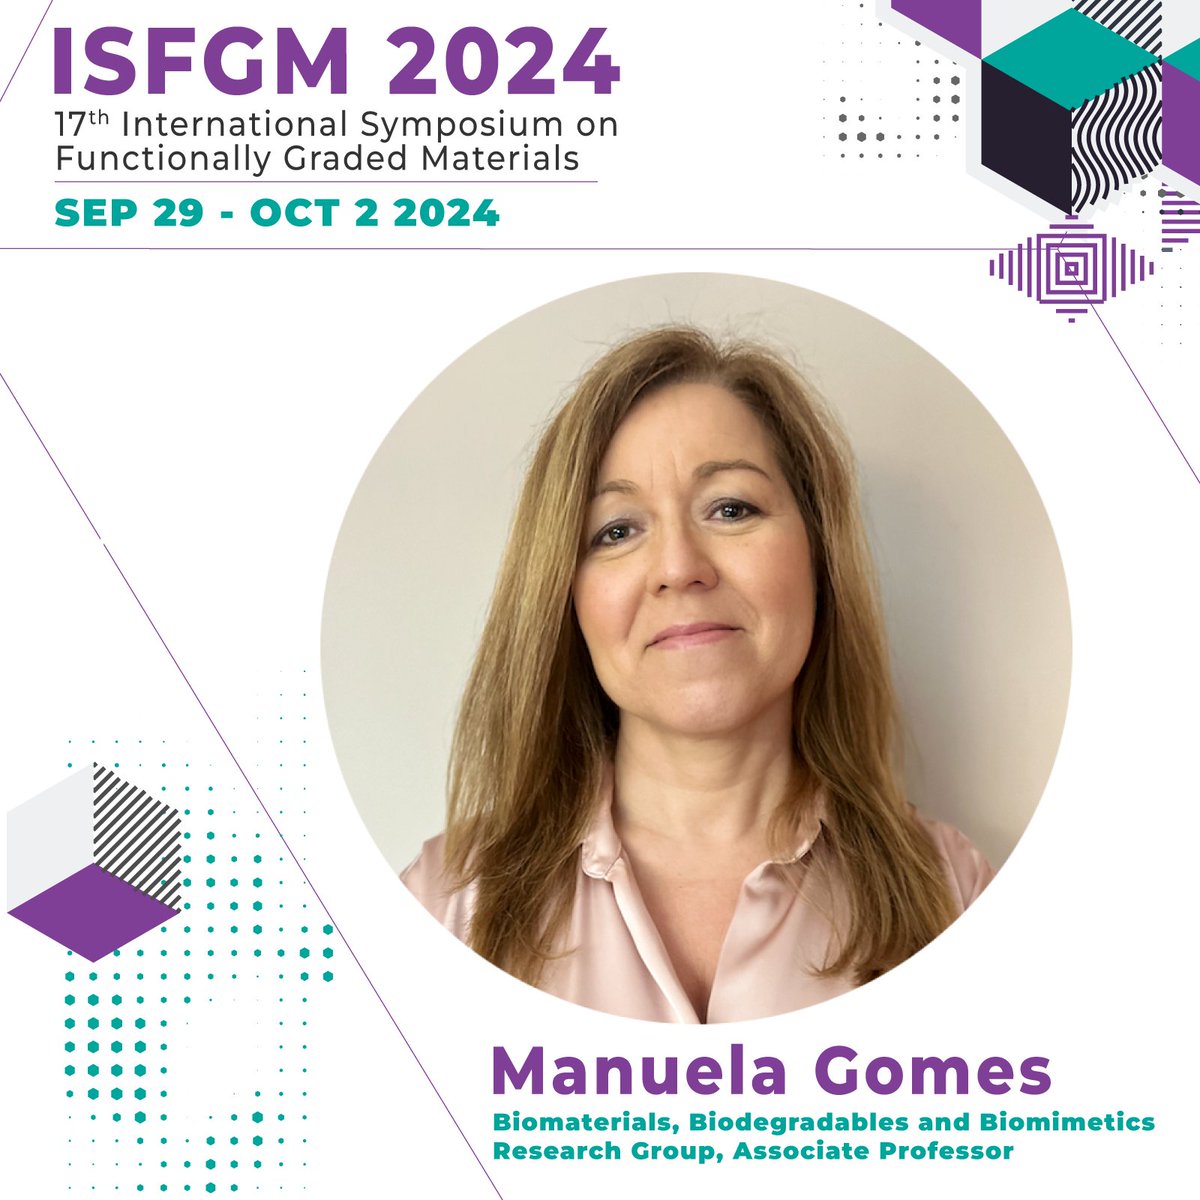 📢Meet our stellar lineup of plenary speakers for the upcoming 2024 Functionally #GradedMaterials (#FGMs) #Conference!  

+ Professor Manuela Gomes, @3bsuminho

📢 Submit your abstract today: events.inl.int/isfgm2024 

#inlnano #abstractsubmission #speakers #isfgm2024